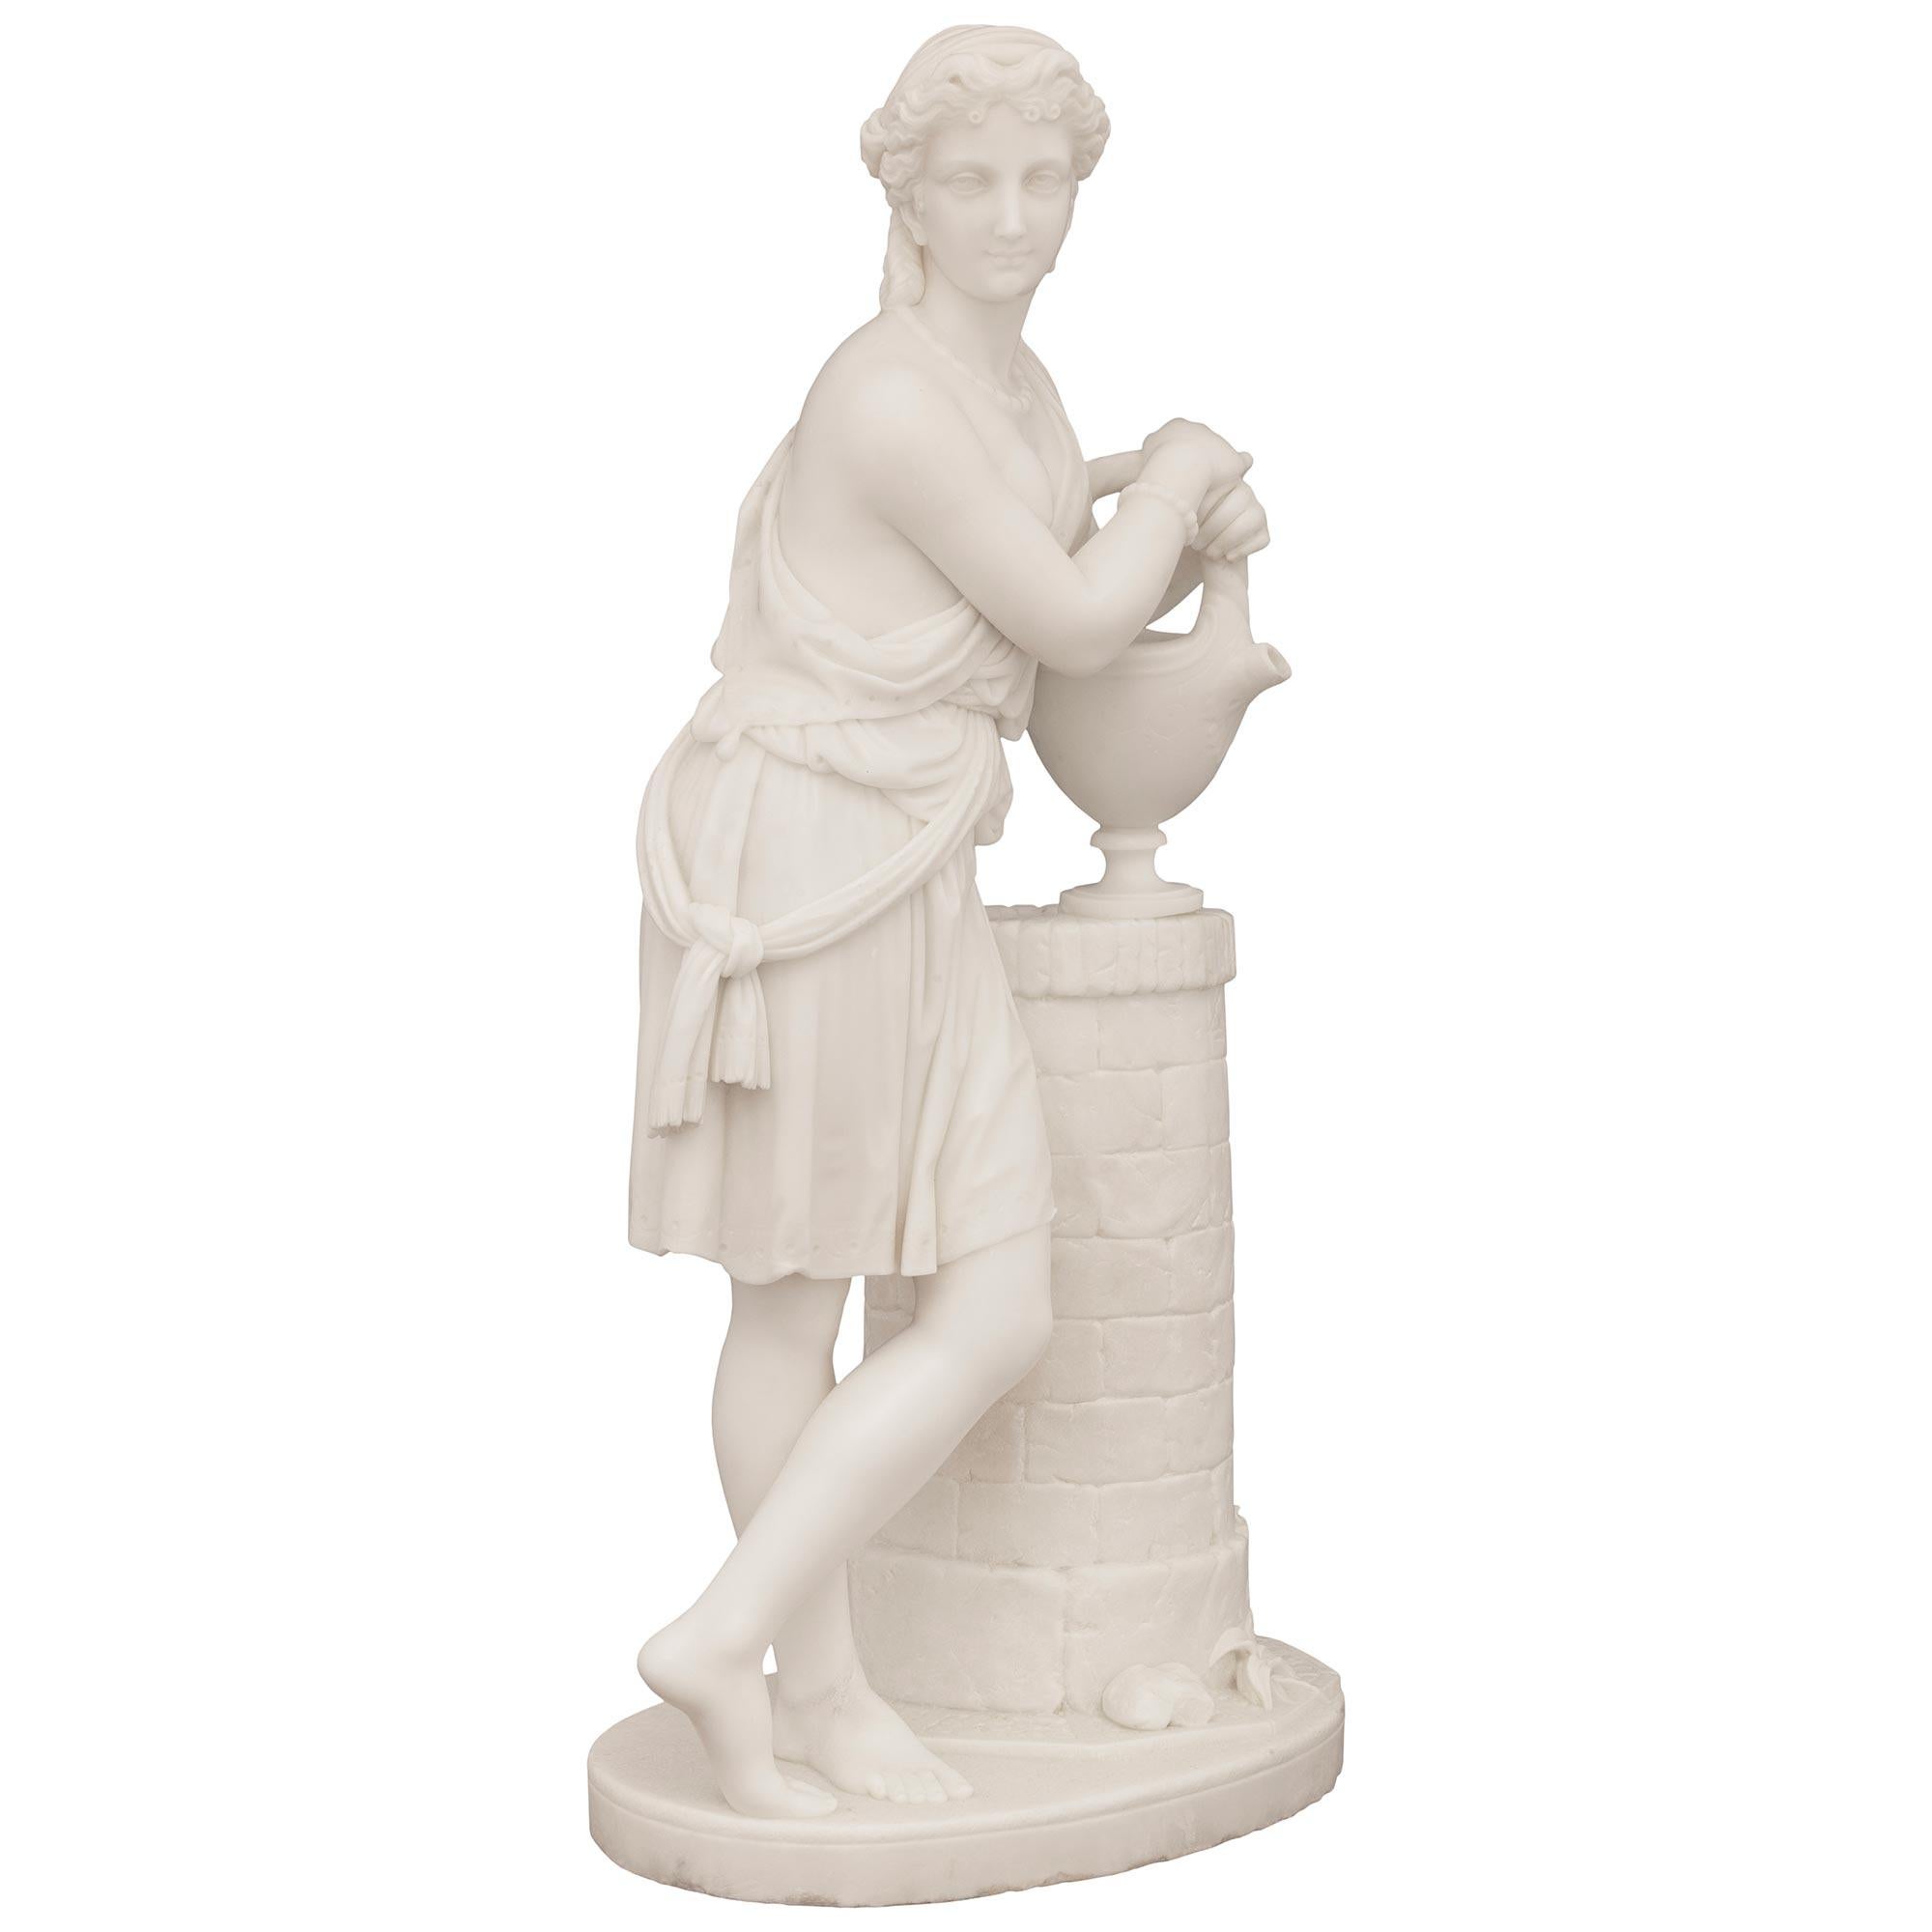 An Italian early 19th century marble statue by Carmelo Fontana In Good Condition For Sale In West Palm Beach, FL